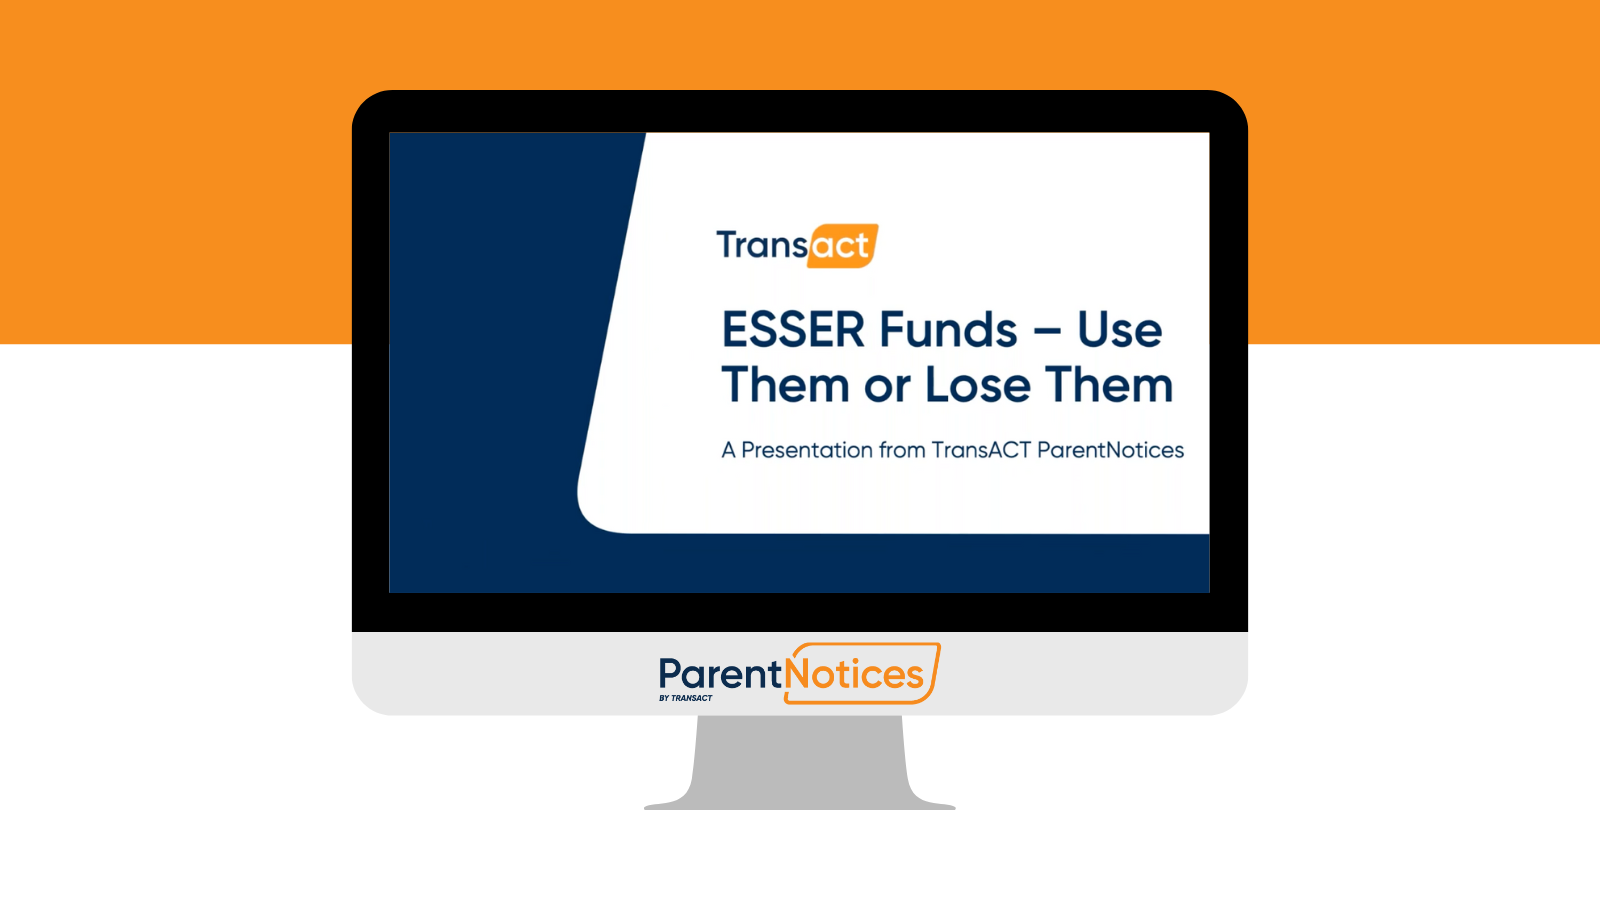 ESSER Funds: Use Them or Lose Them